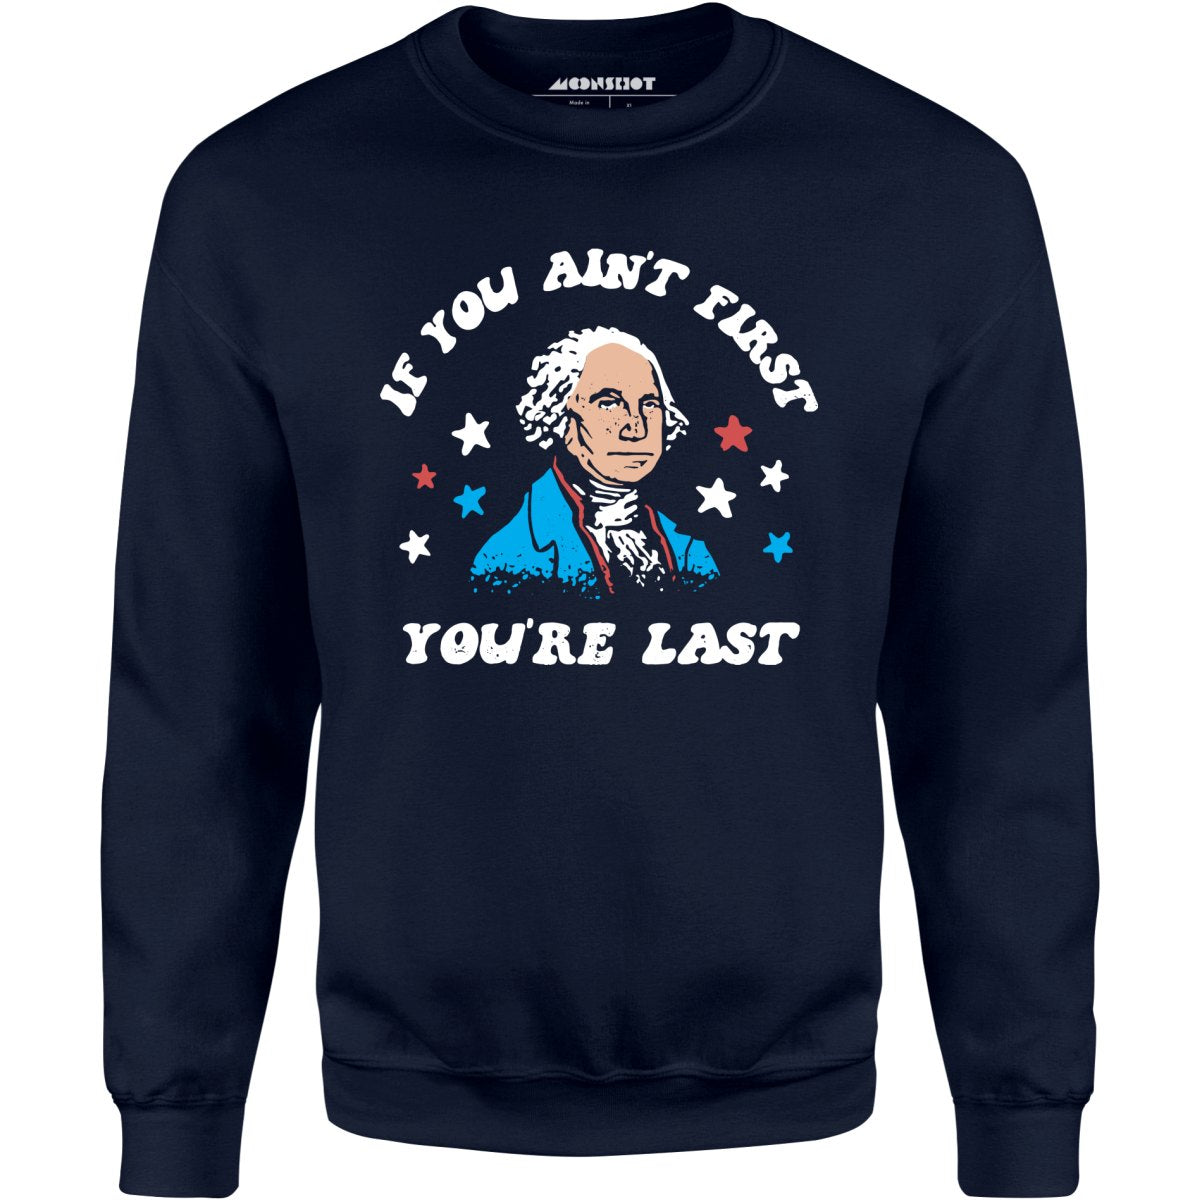 If You Ain't First You're Last - Unisex Sweatshirt